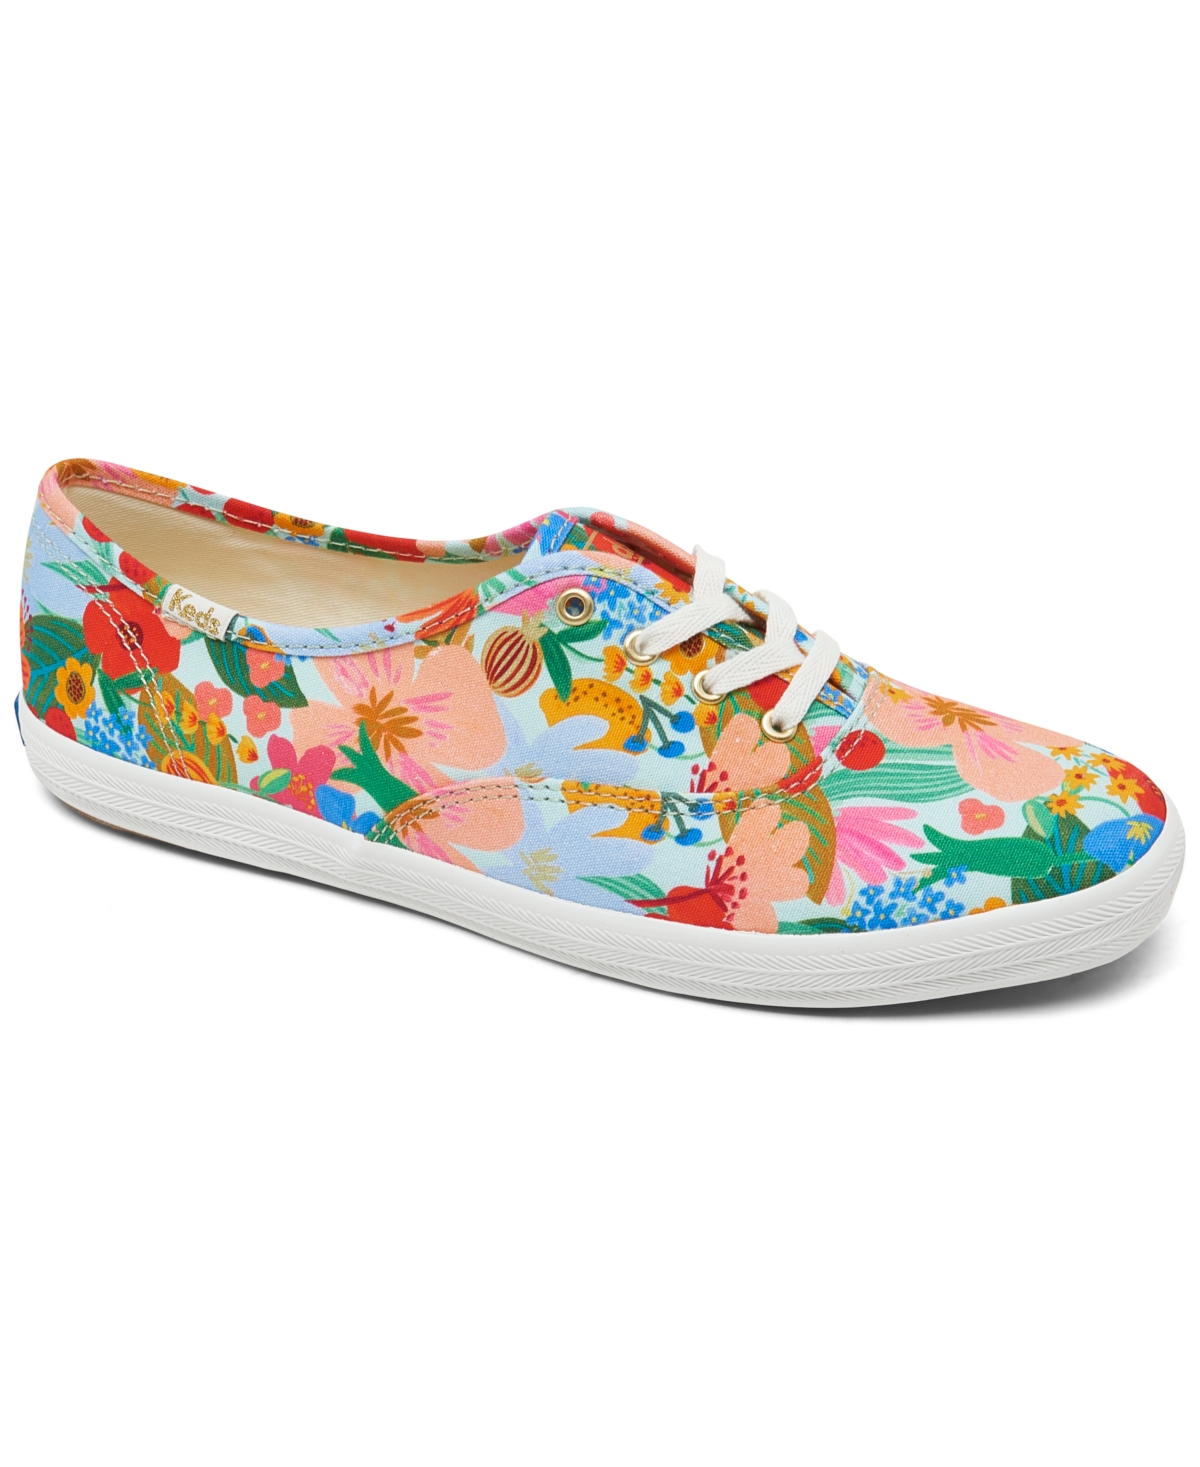 Keds Women's x Rifle Paper Co. Champion Sicily Canvas Casual Sneakers from Finish Line